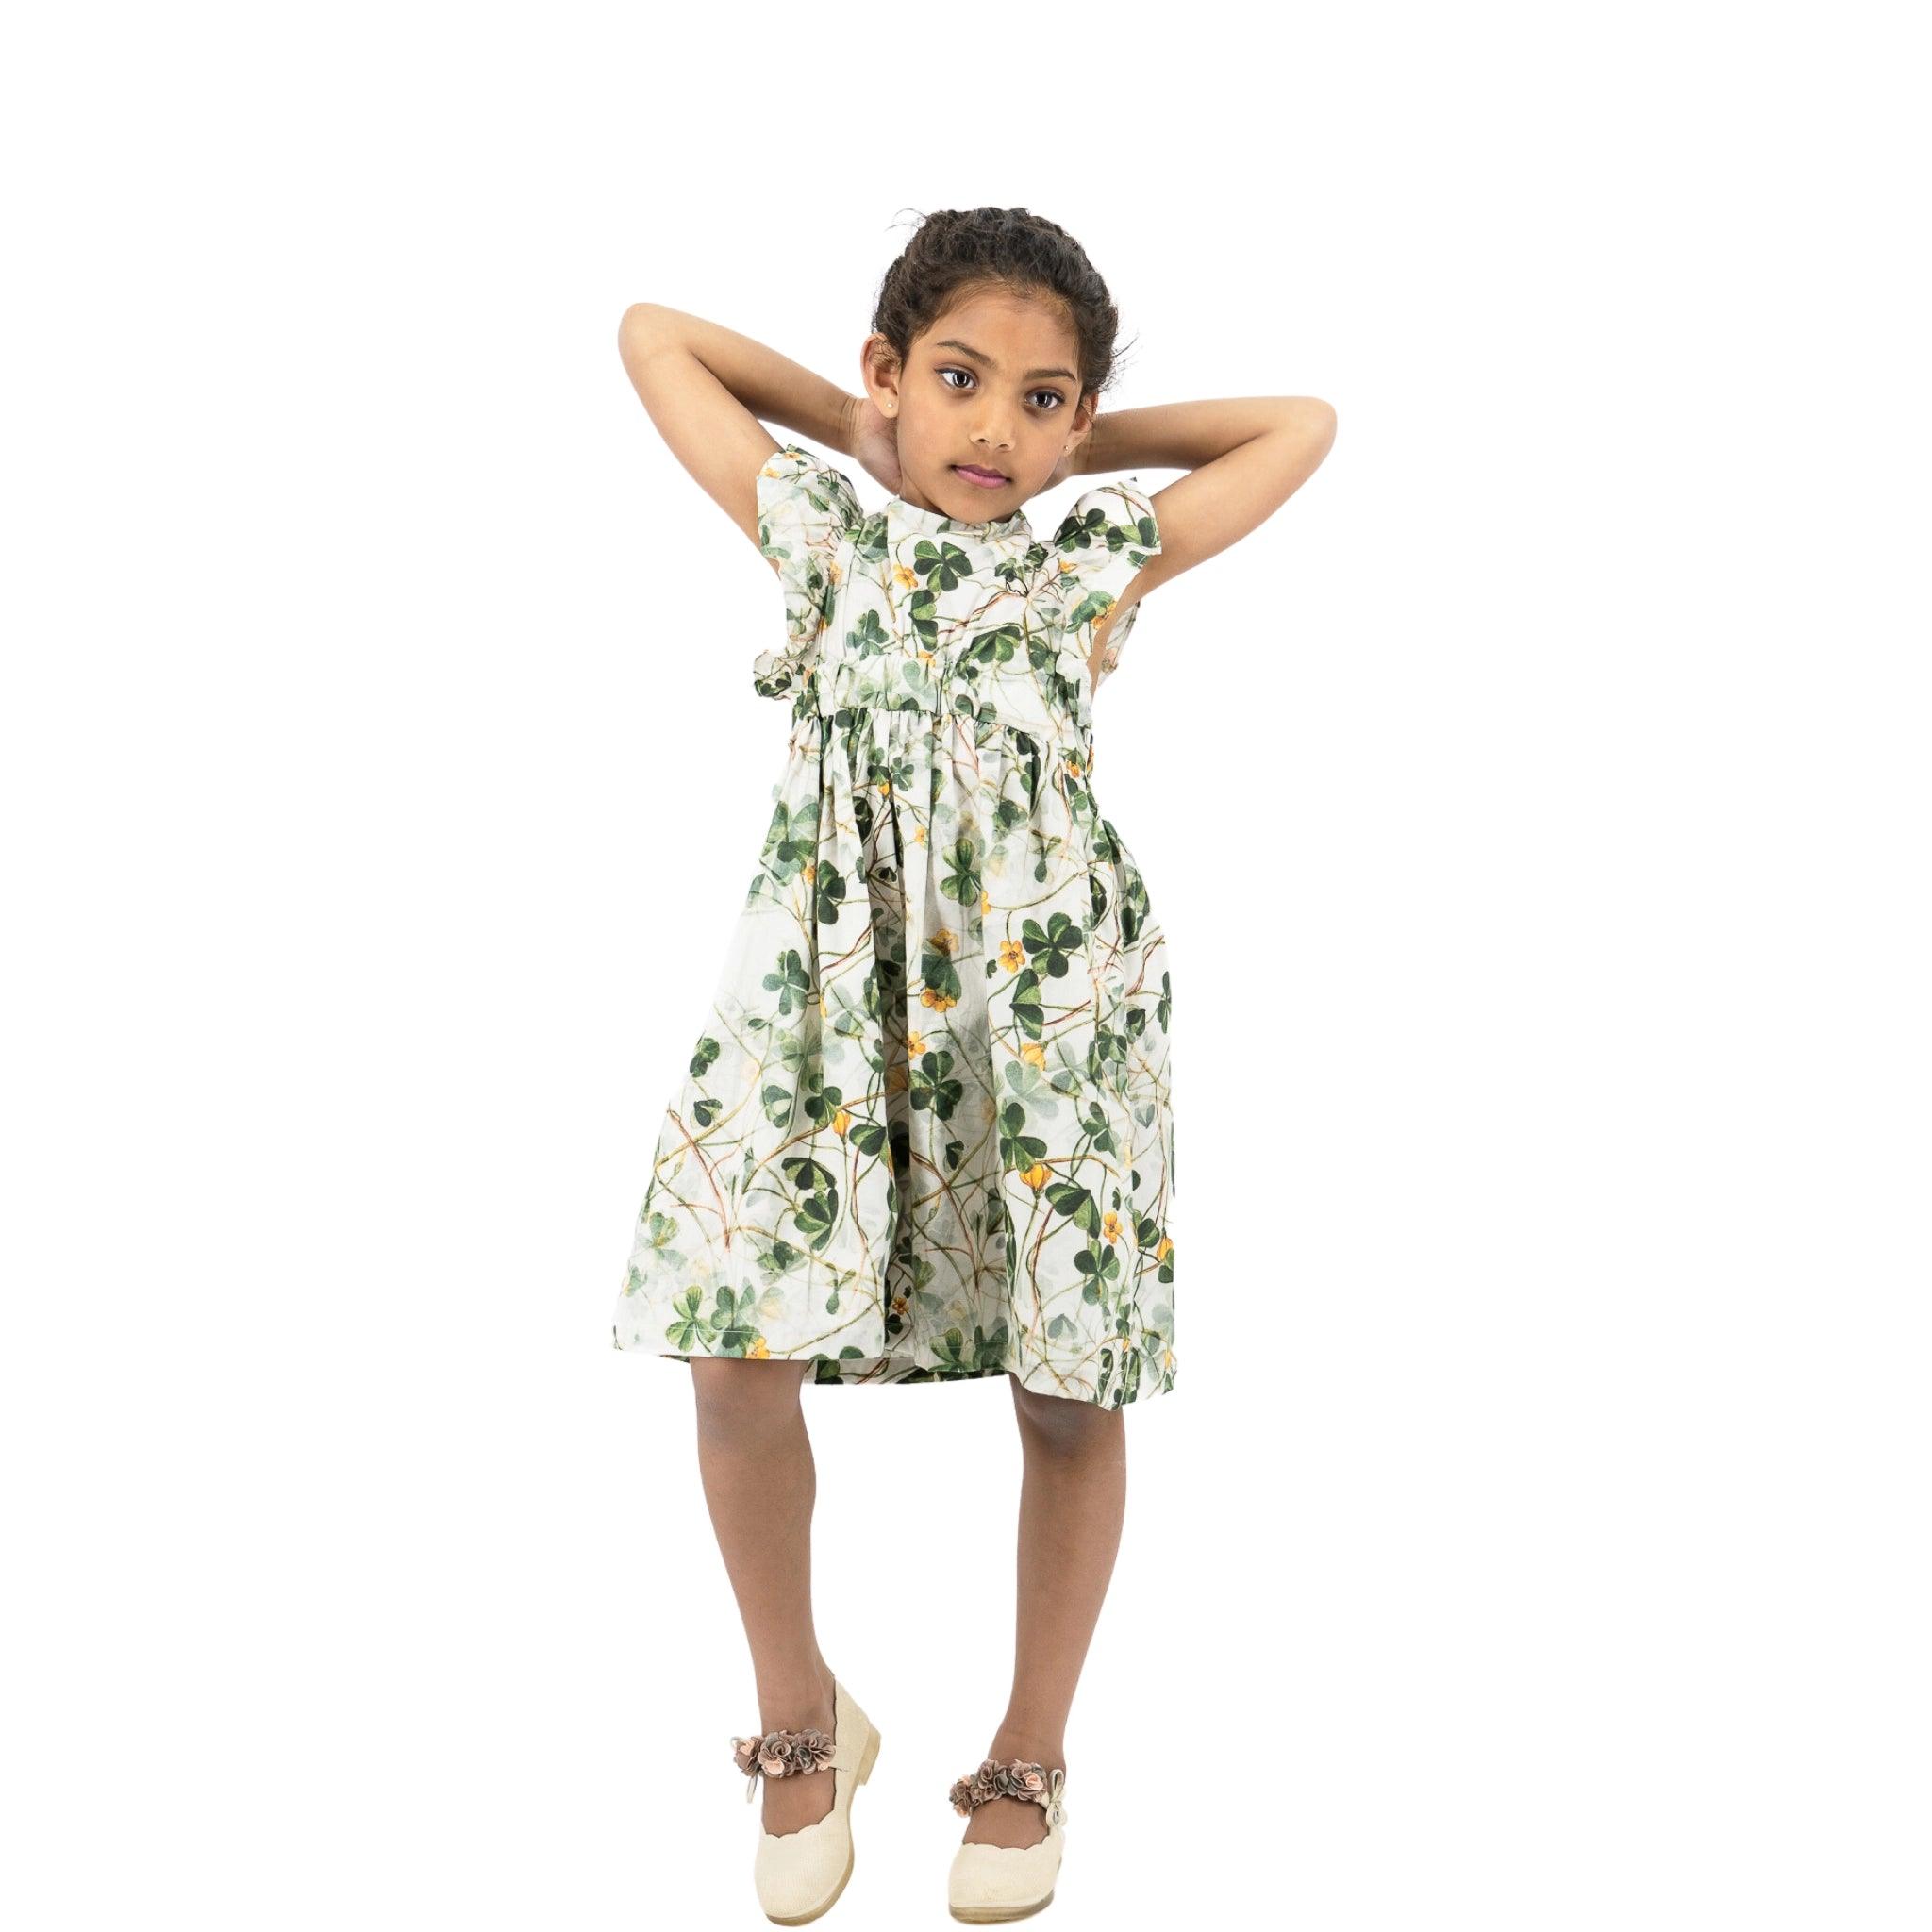 Young girl in a Karee green floral cotton dress standing with her hands behind her head, looking at the camera, against a white background.